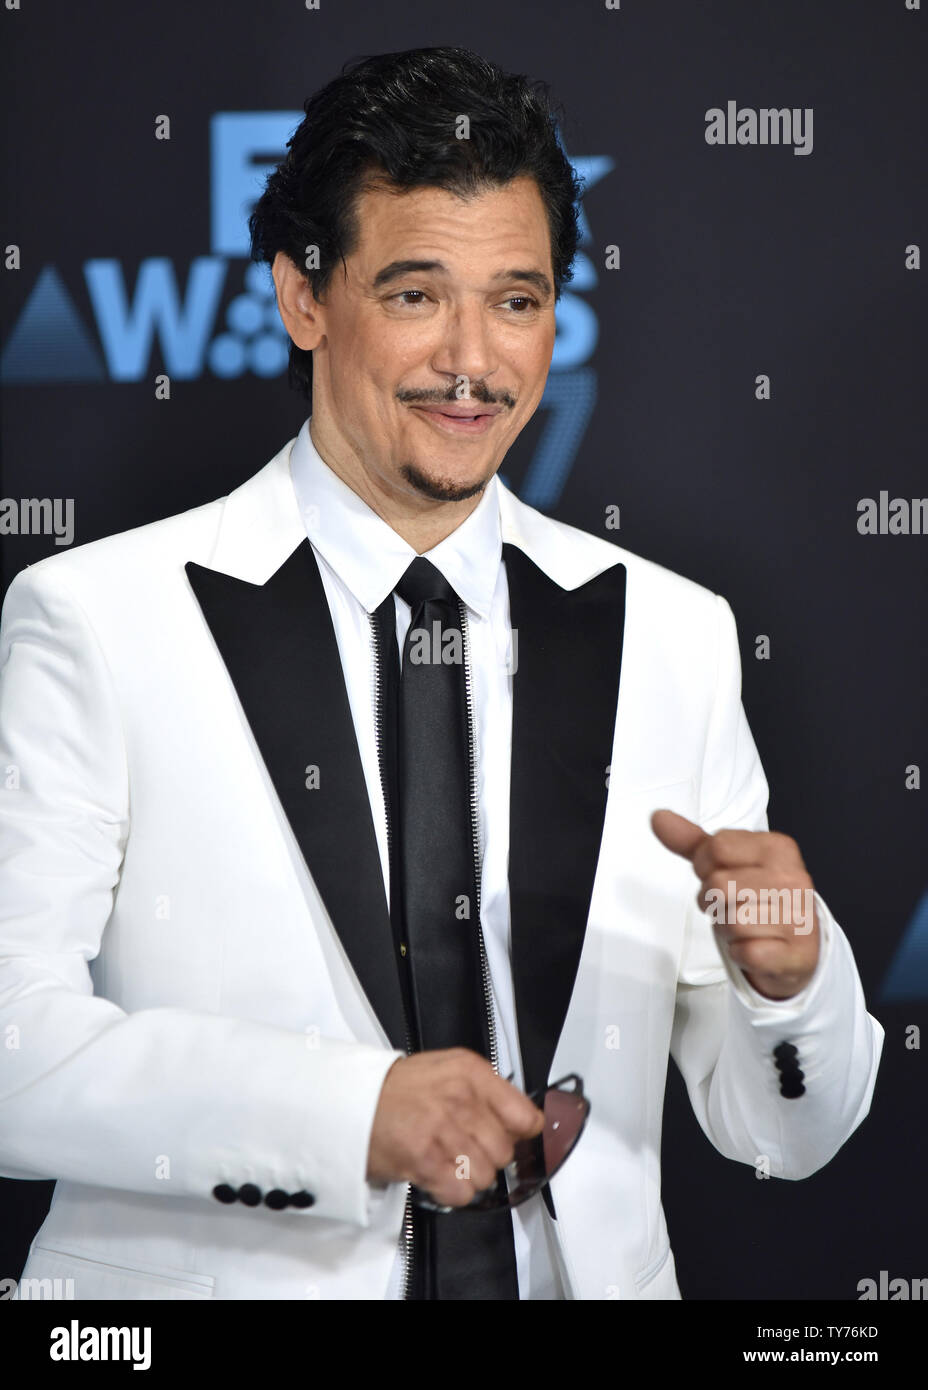 Recording artist El DeBarge attends the 17th annual BET Awards at Microsoft Theater in Los Angeles on June 25, 2017. The ceremony celebrates achievements in entertainment and honors music, sports, television, and movies released between April 1, 2016 and March 31, 2017.  Photo by Christine Chew/UPI Stock Photo